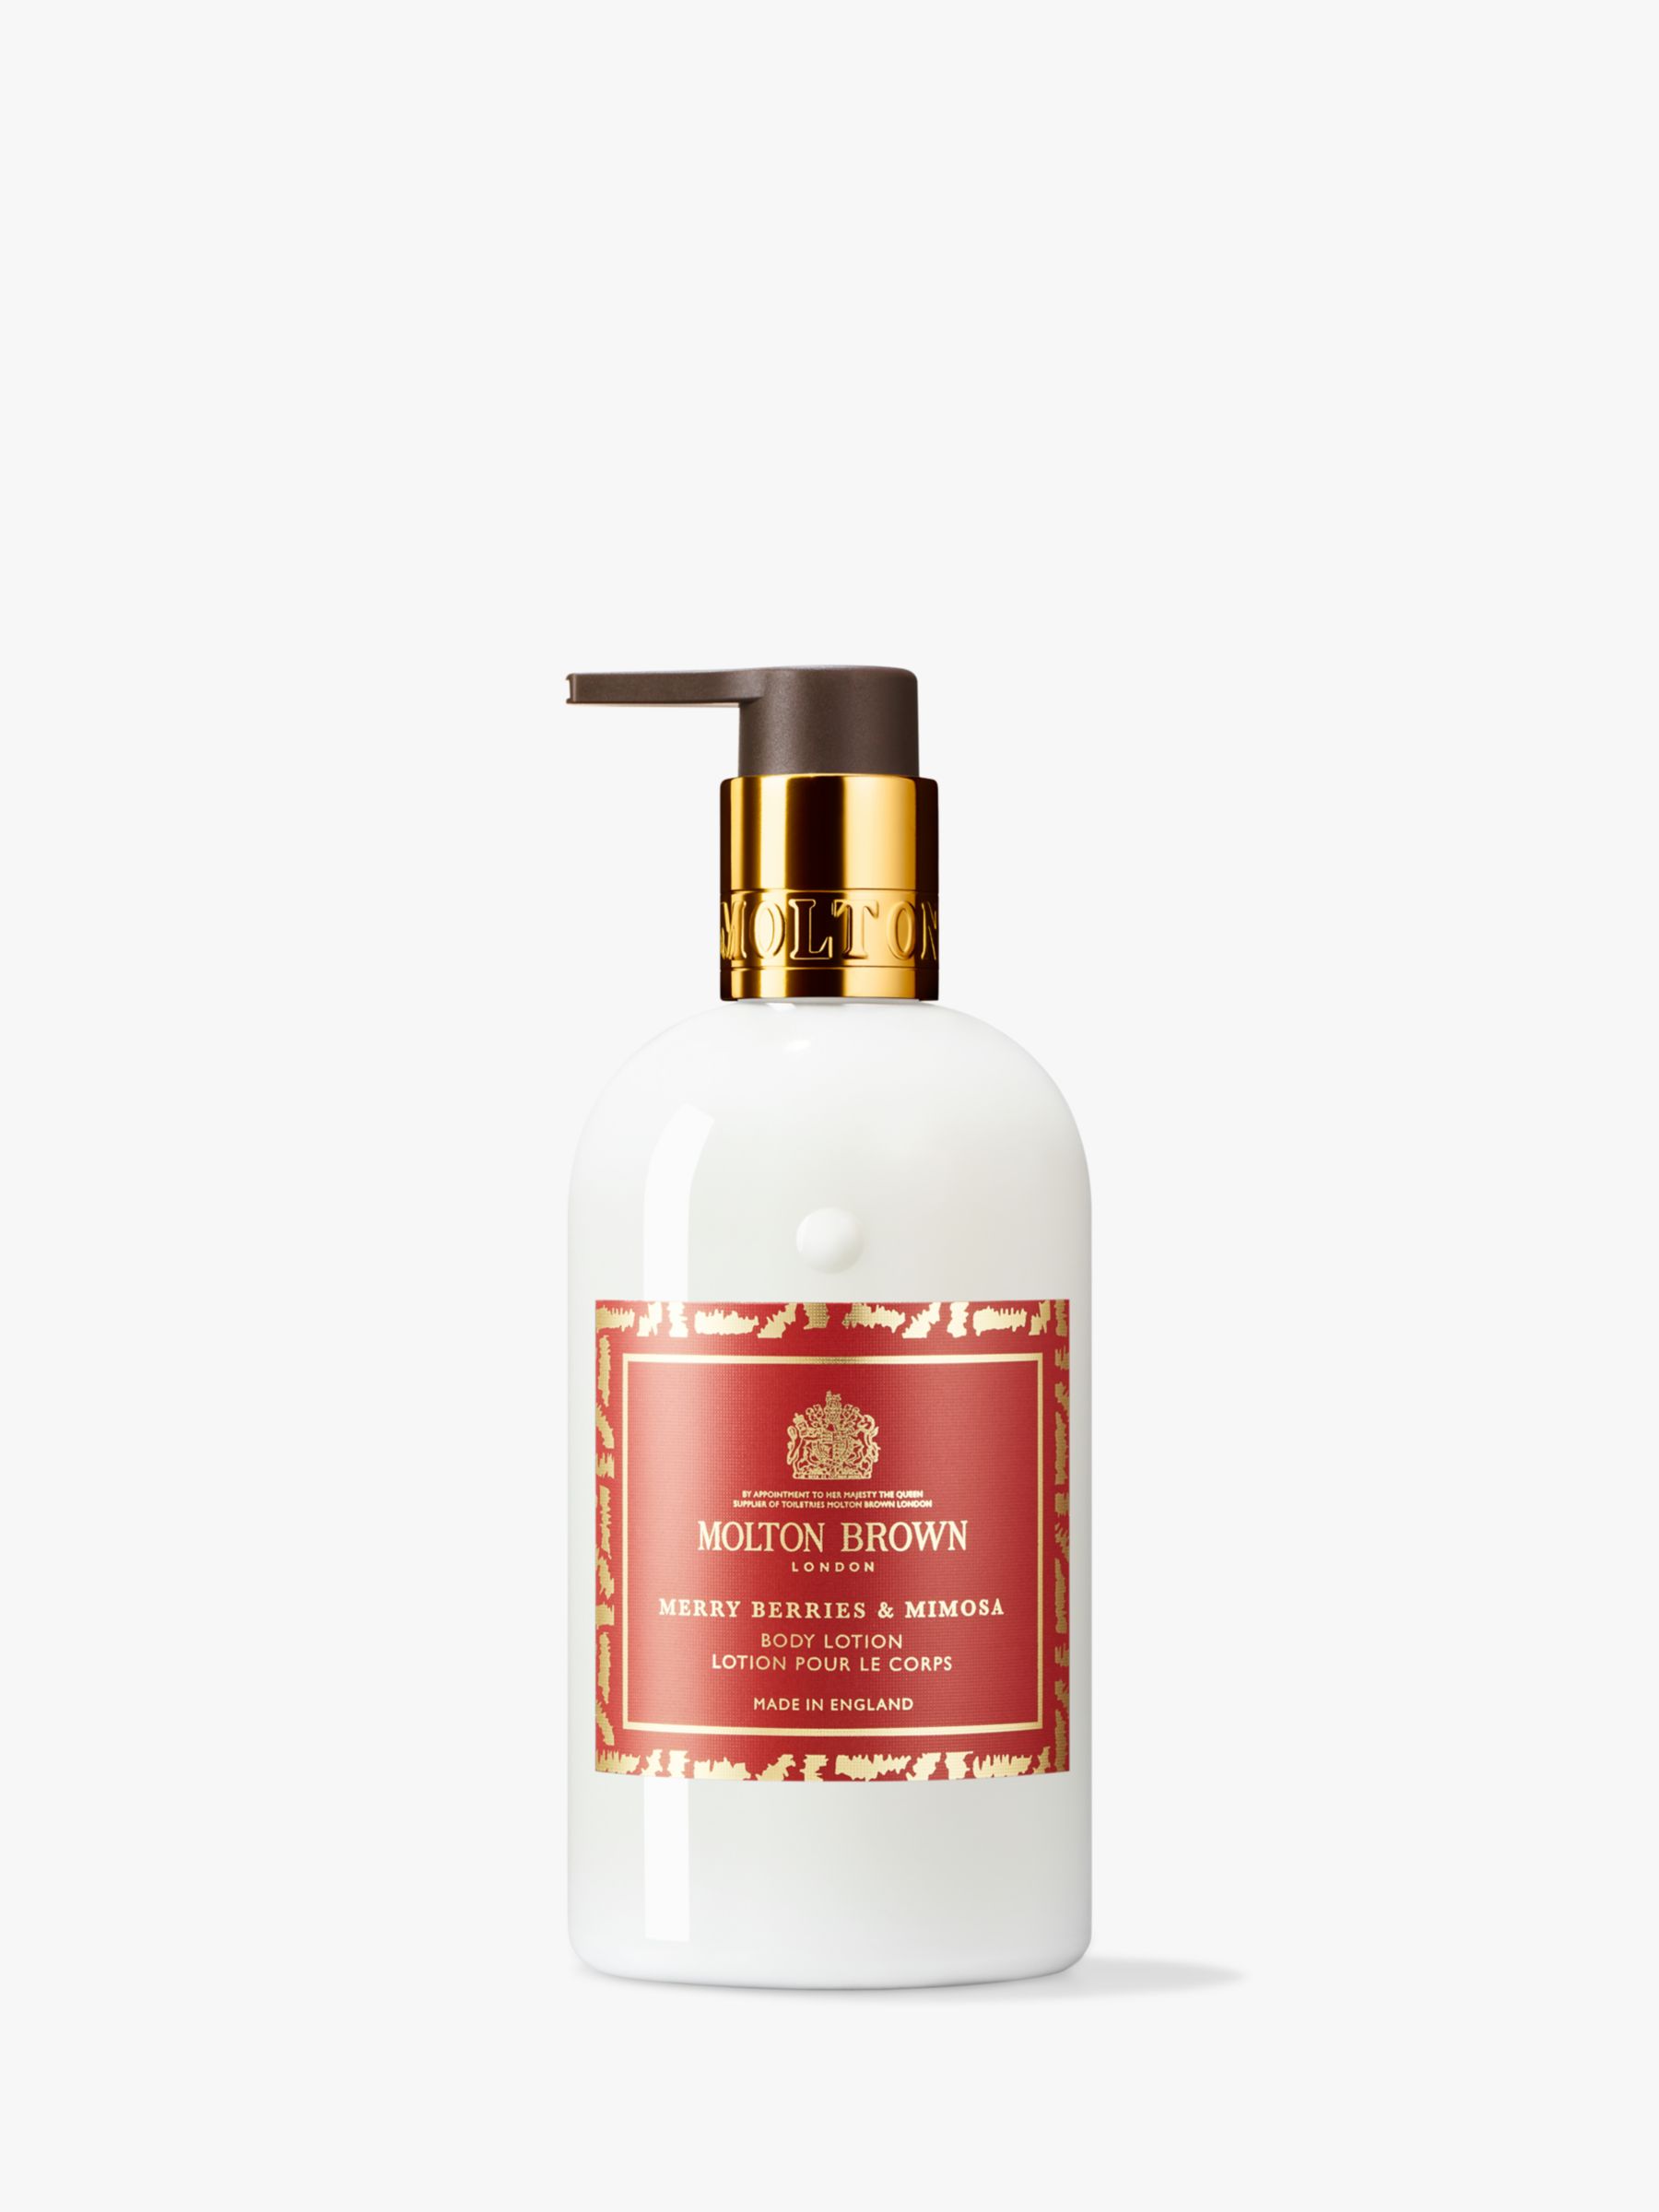 Molton Brown Merry Berries & Mimosa Body Lotion, 300ml at John Lewis ...